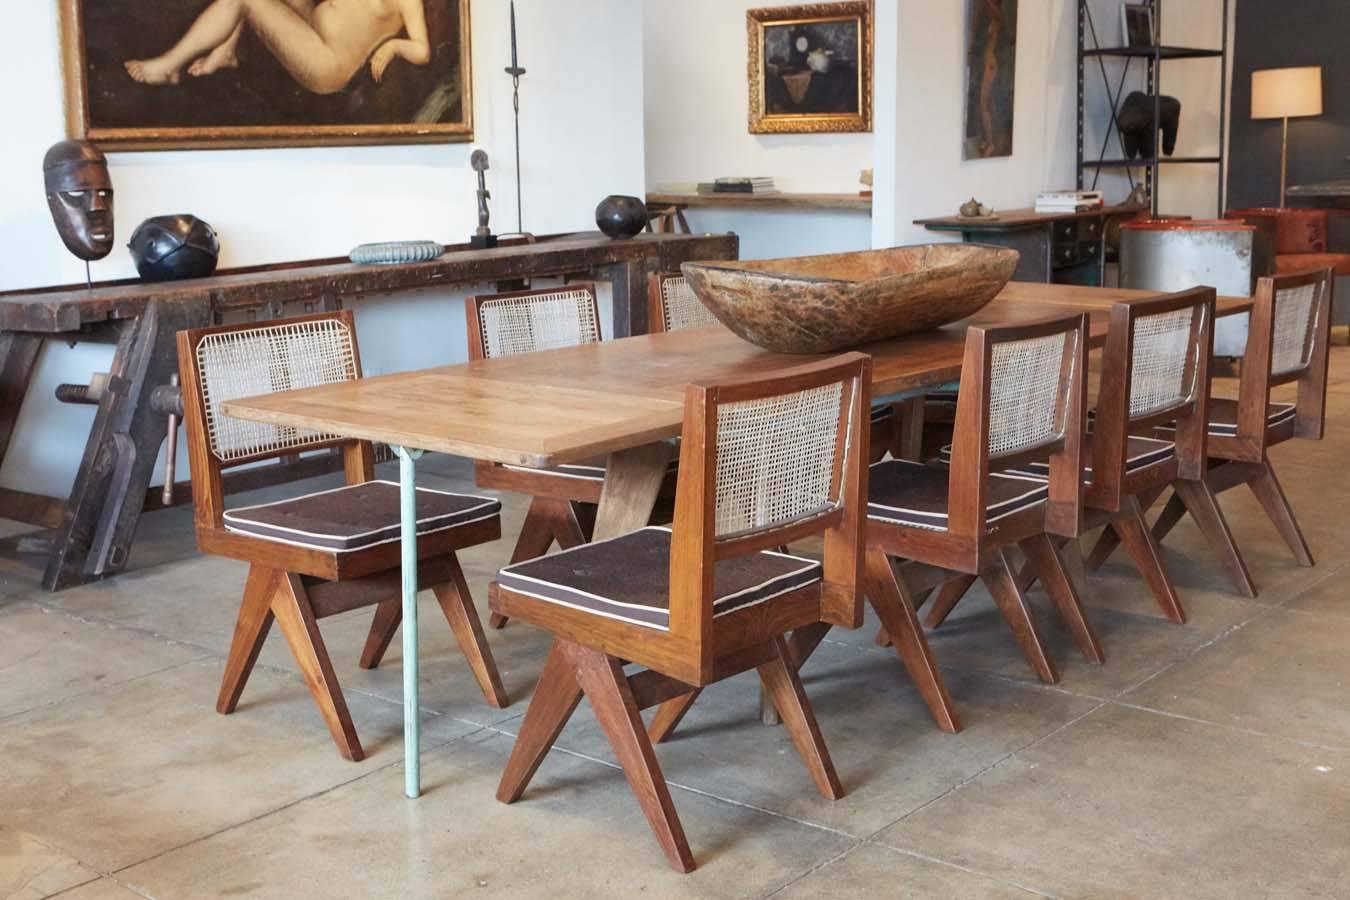 Produced in limited numbers for an oil firm in France, the extender table is a rarely seen piece by French designer, Jean Prouvé. 
The extenders can be easily removed but once in position are stable and usable portions of the table.